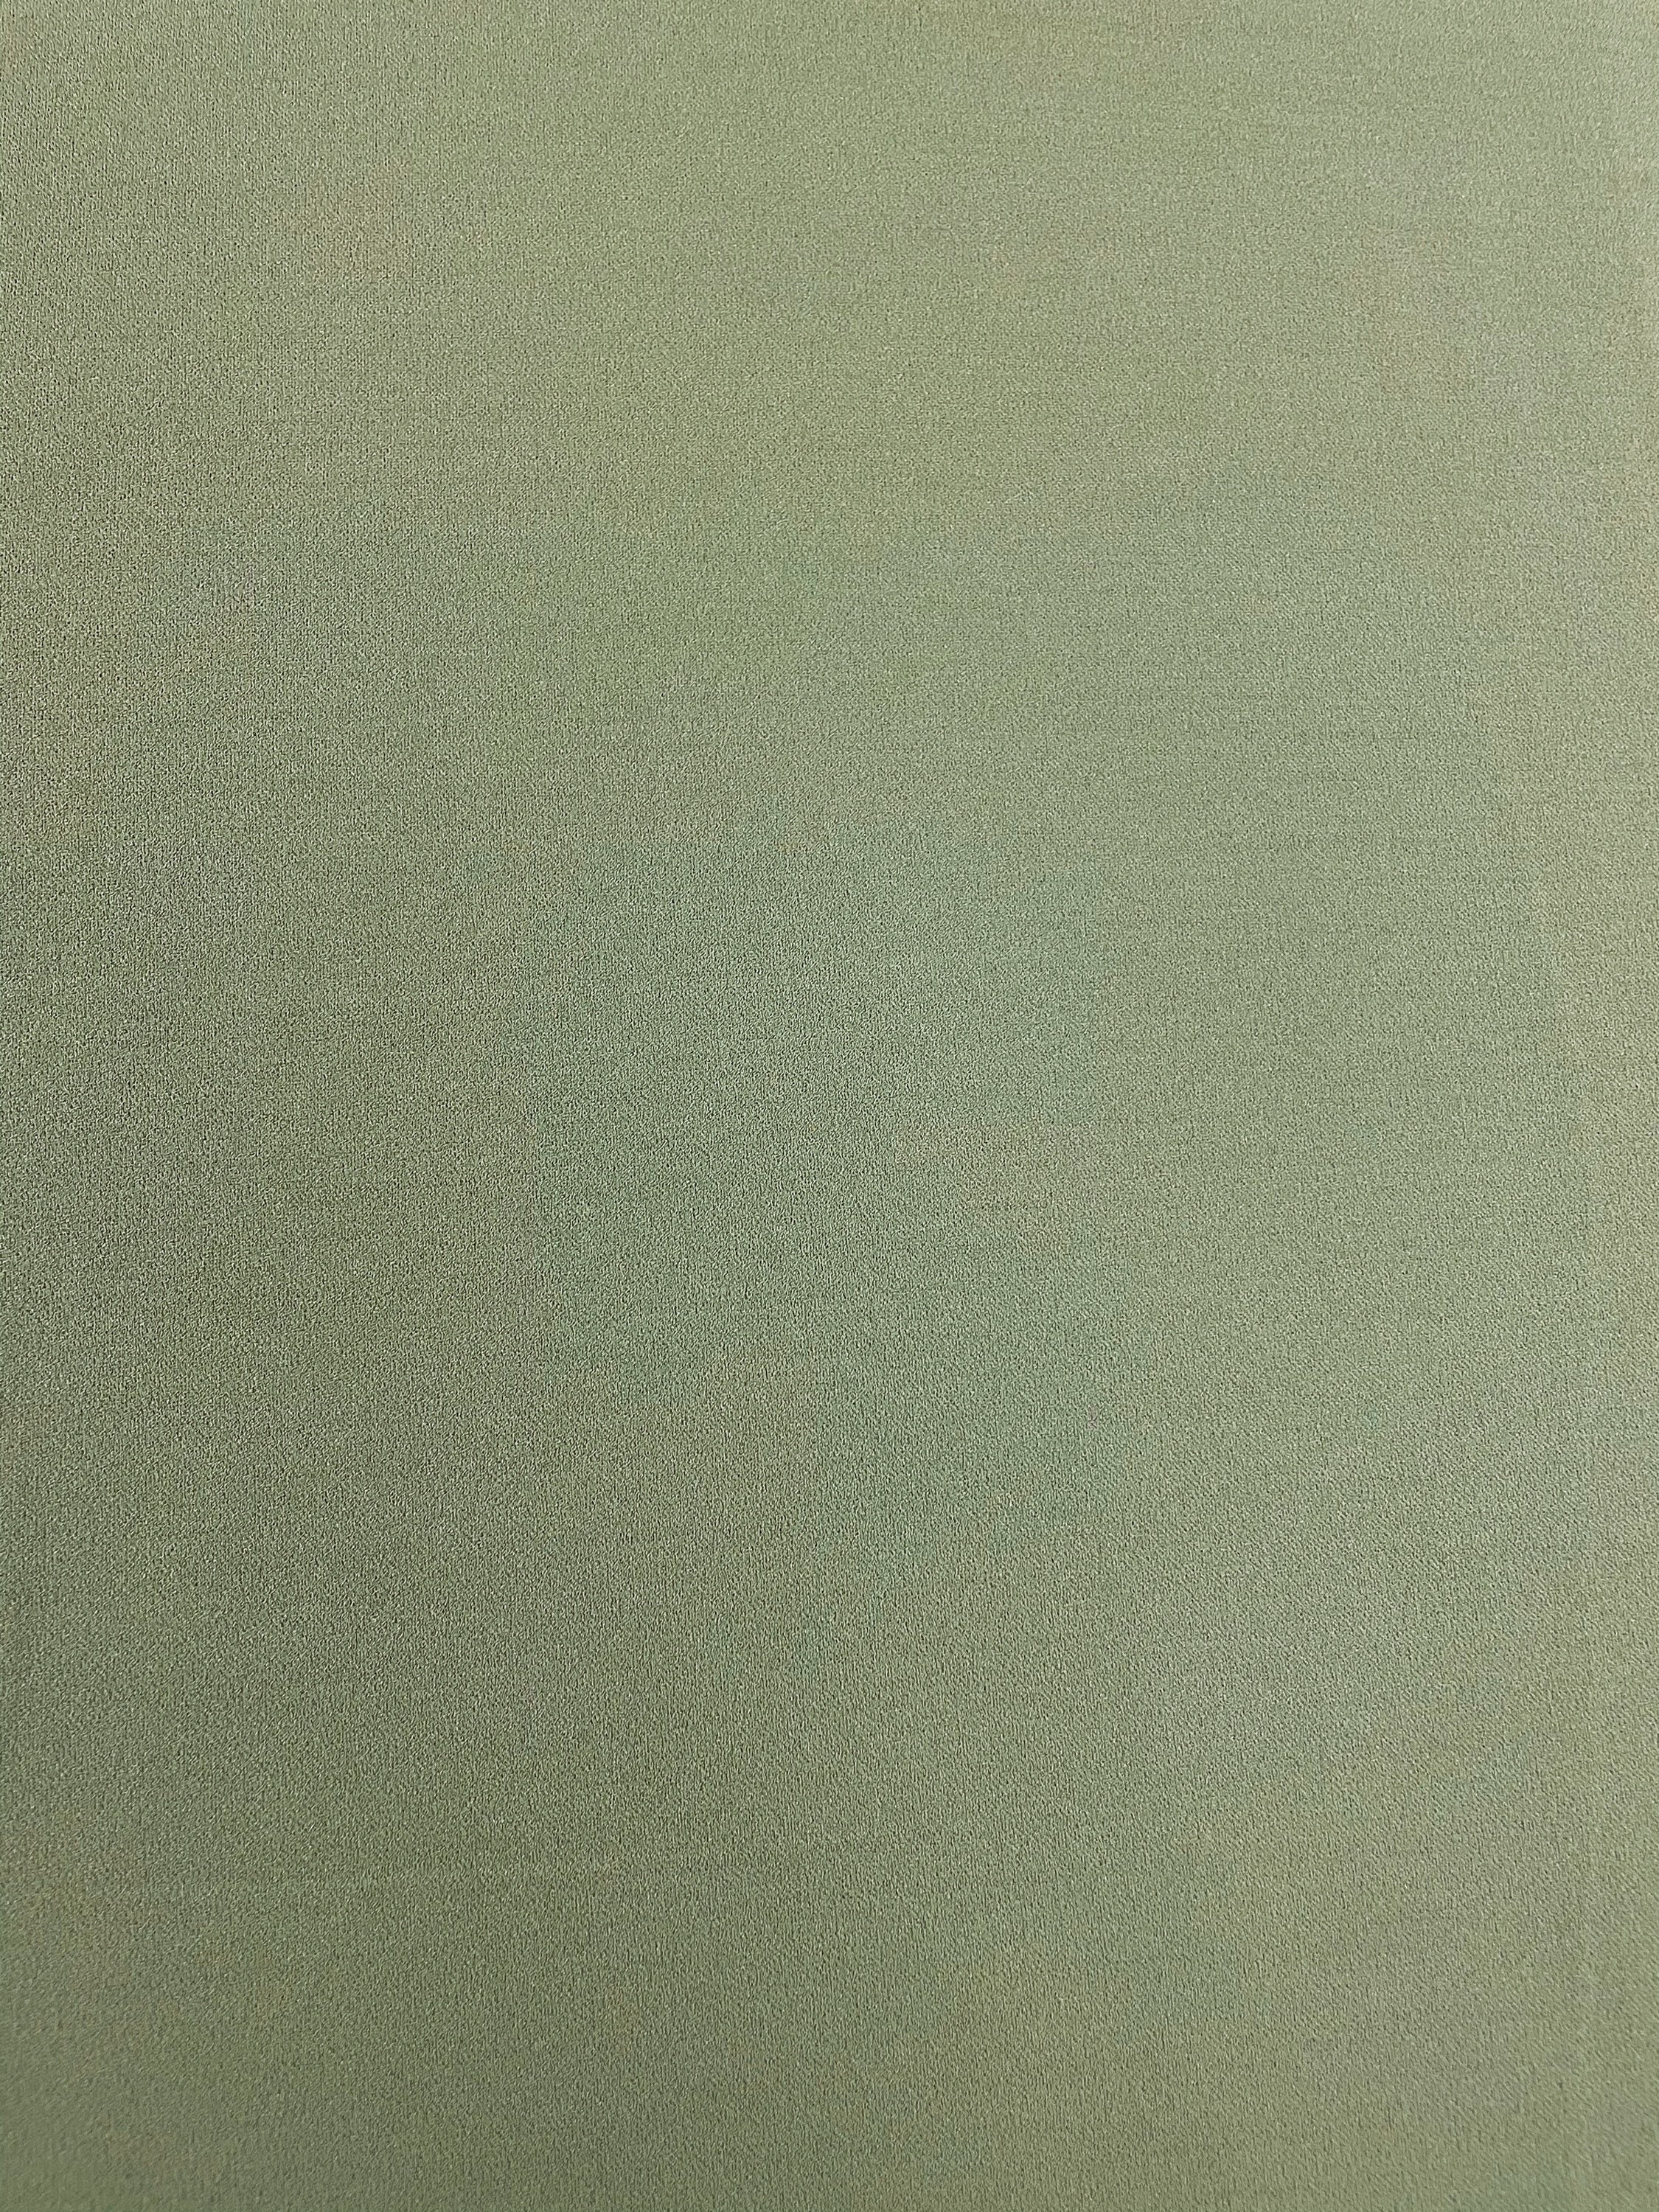 Pistachio Stretch Crepe Fabric, Sage Green Moss Crepe Fabric by Yard, Green  4ply Crepe, Light Green Solid Fabric, Pastel Green Stretch Twill -   Canada